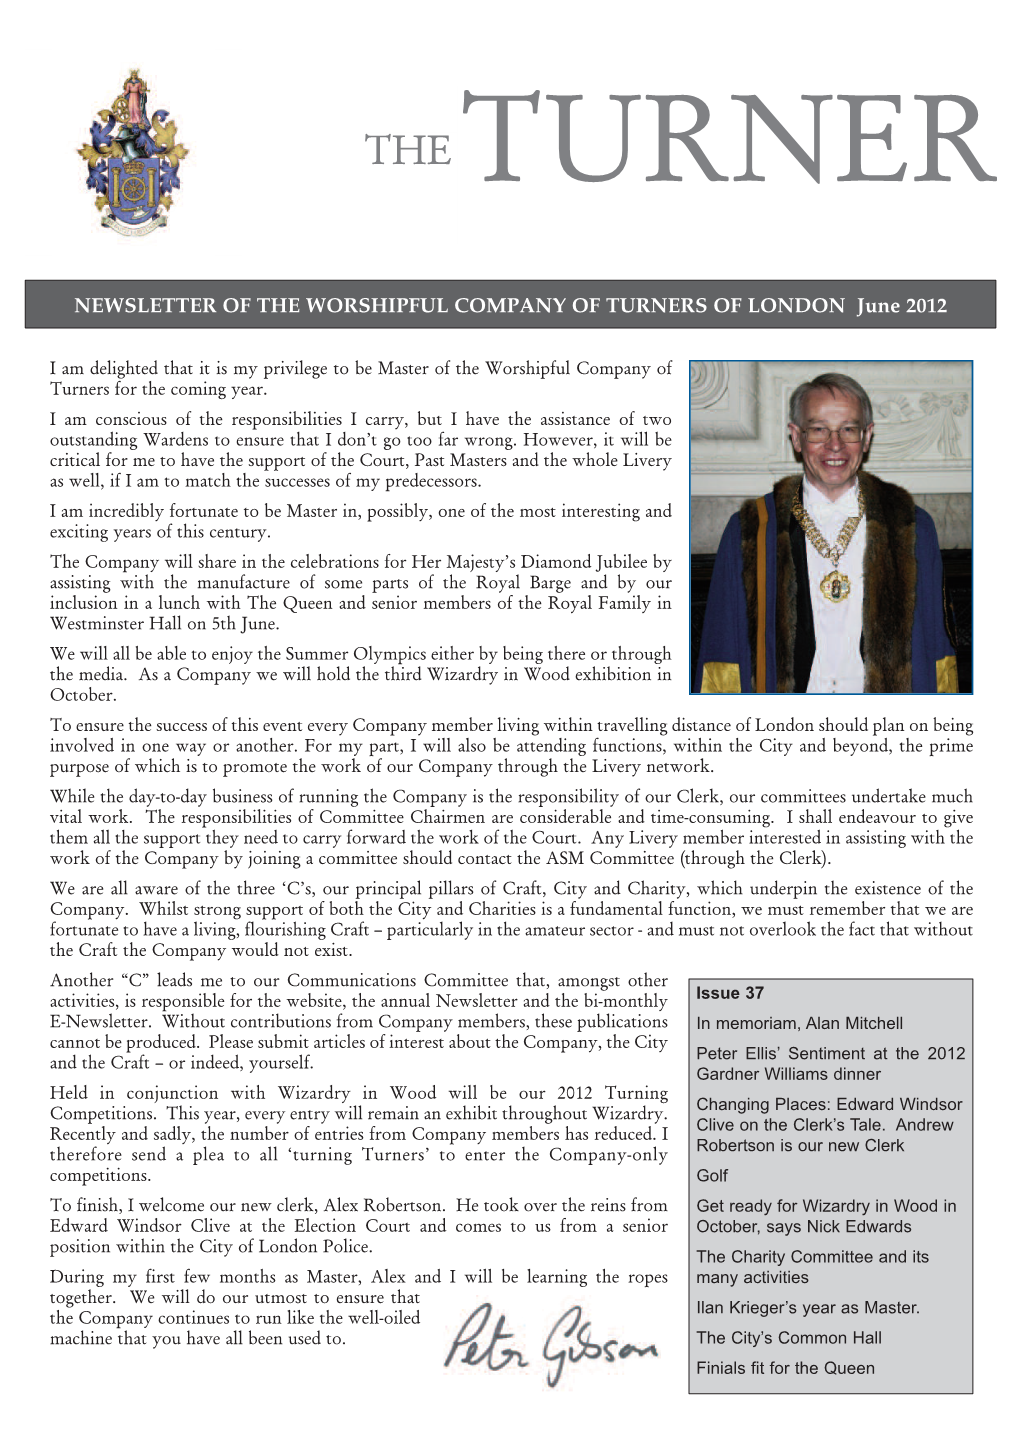 NEWSLETTER of the WORSHIPFUL COMPANY of TURNERS of LONDON June 2012